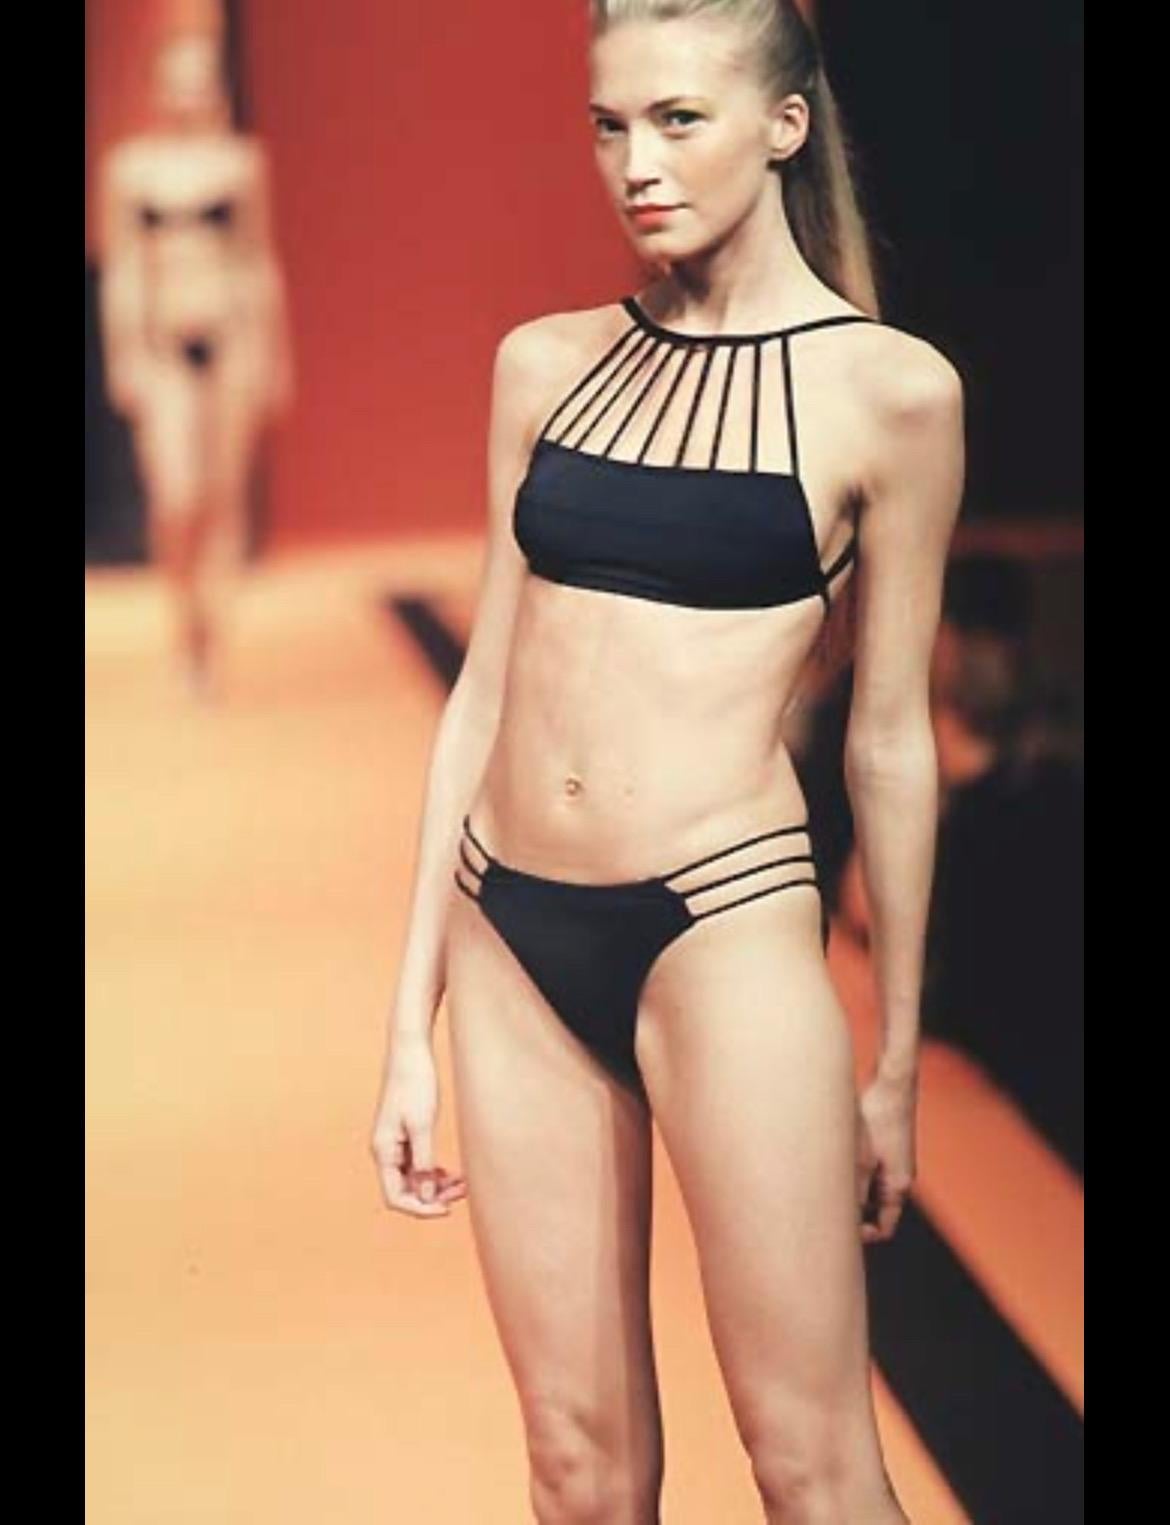 Presenting a fabulous black Herve Leger one-piece swimsuit. From the Spring/Summer 1998 collection, similar bathing suits were featured on the season's runway. This chic one-piece/bodysuit features a strap design above the bust and is made complete